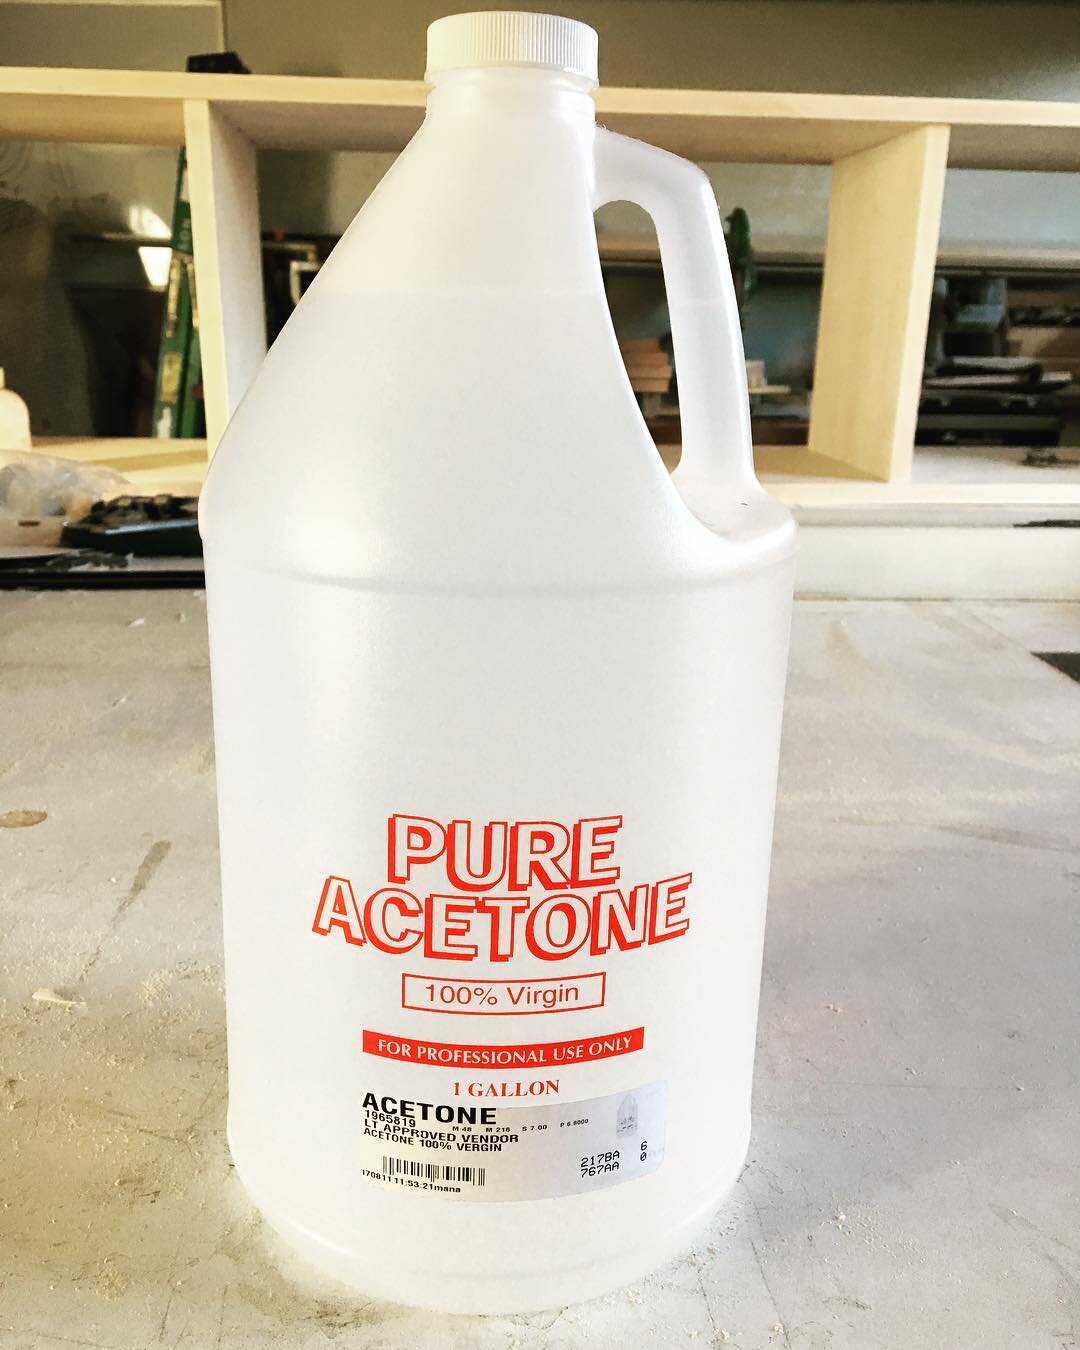 100% Virgin Acetone. It doesn't get less greasier than that. #metalwork #shopjokes #purity